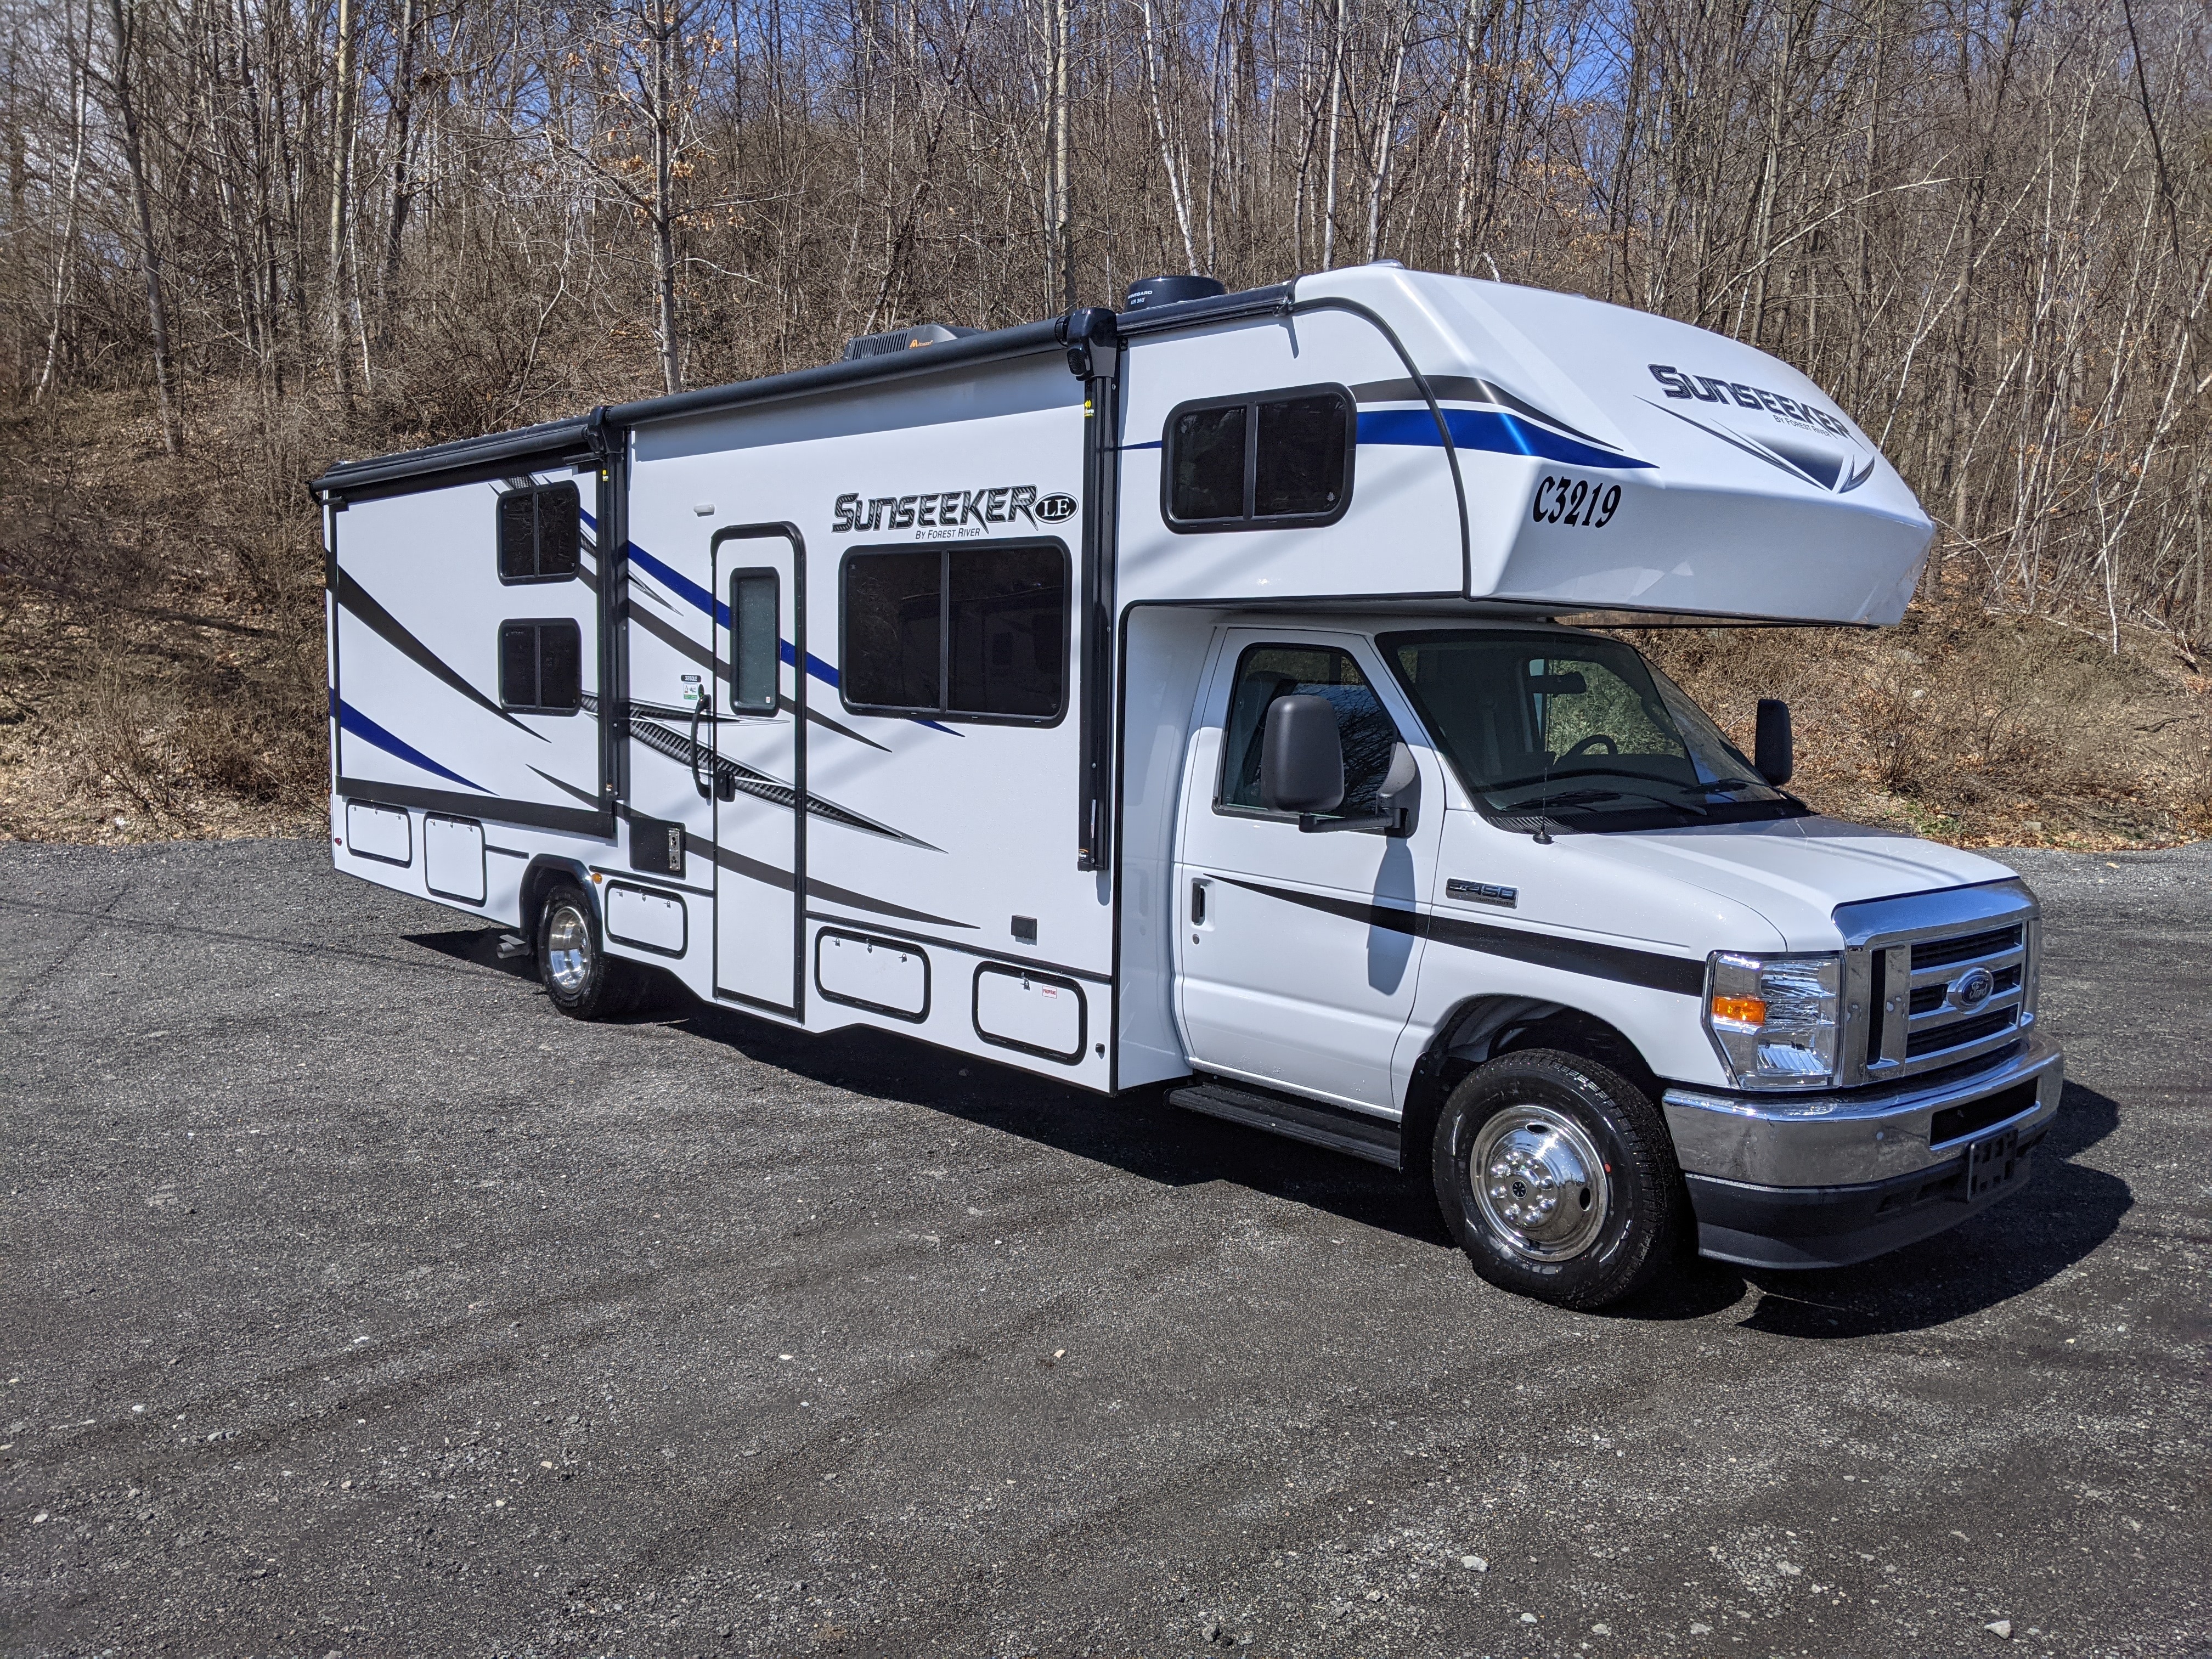 32′ Class C Motorhome for Rental at 84 RV Rentals